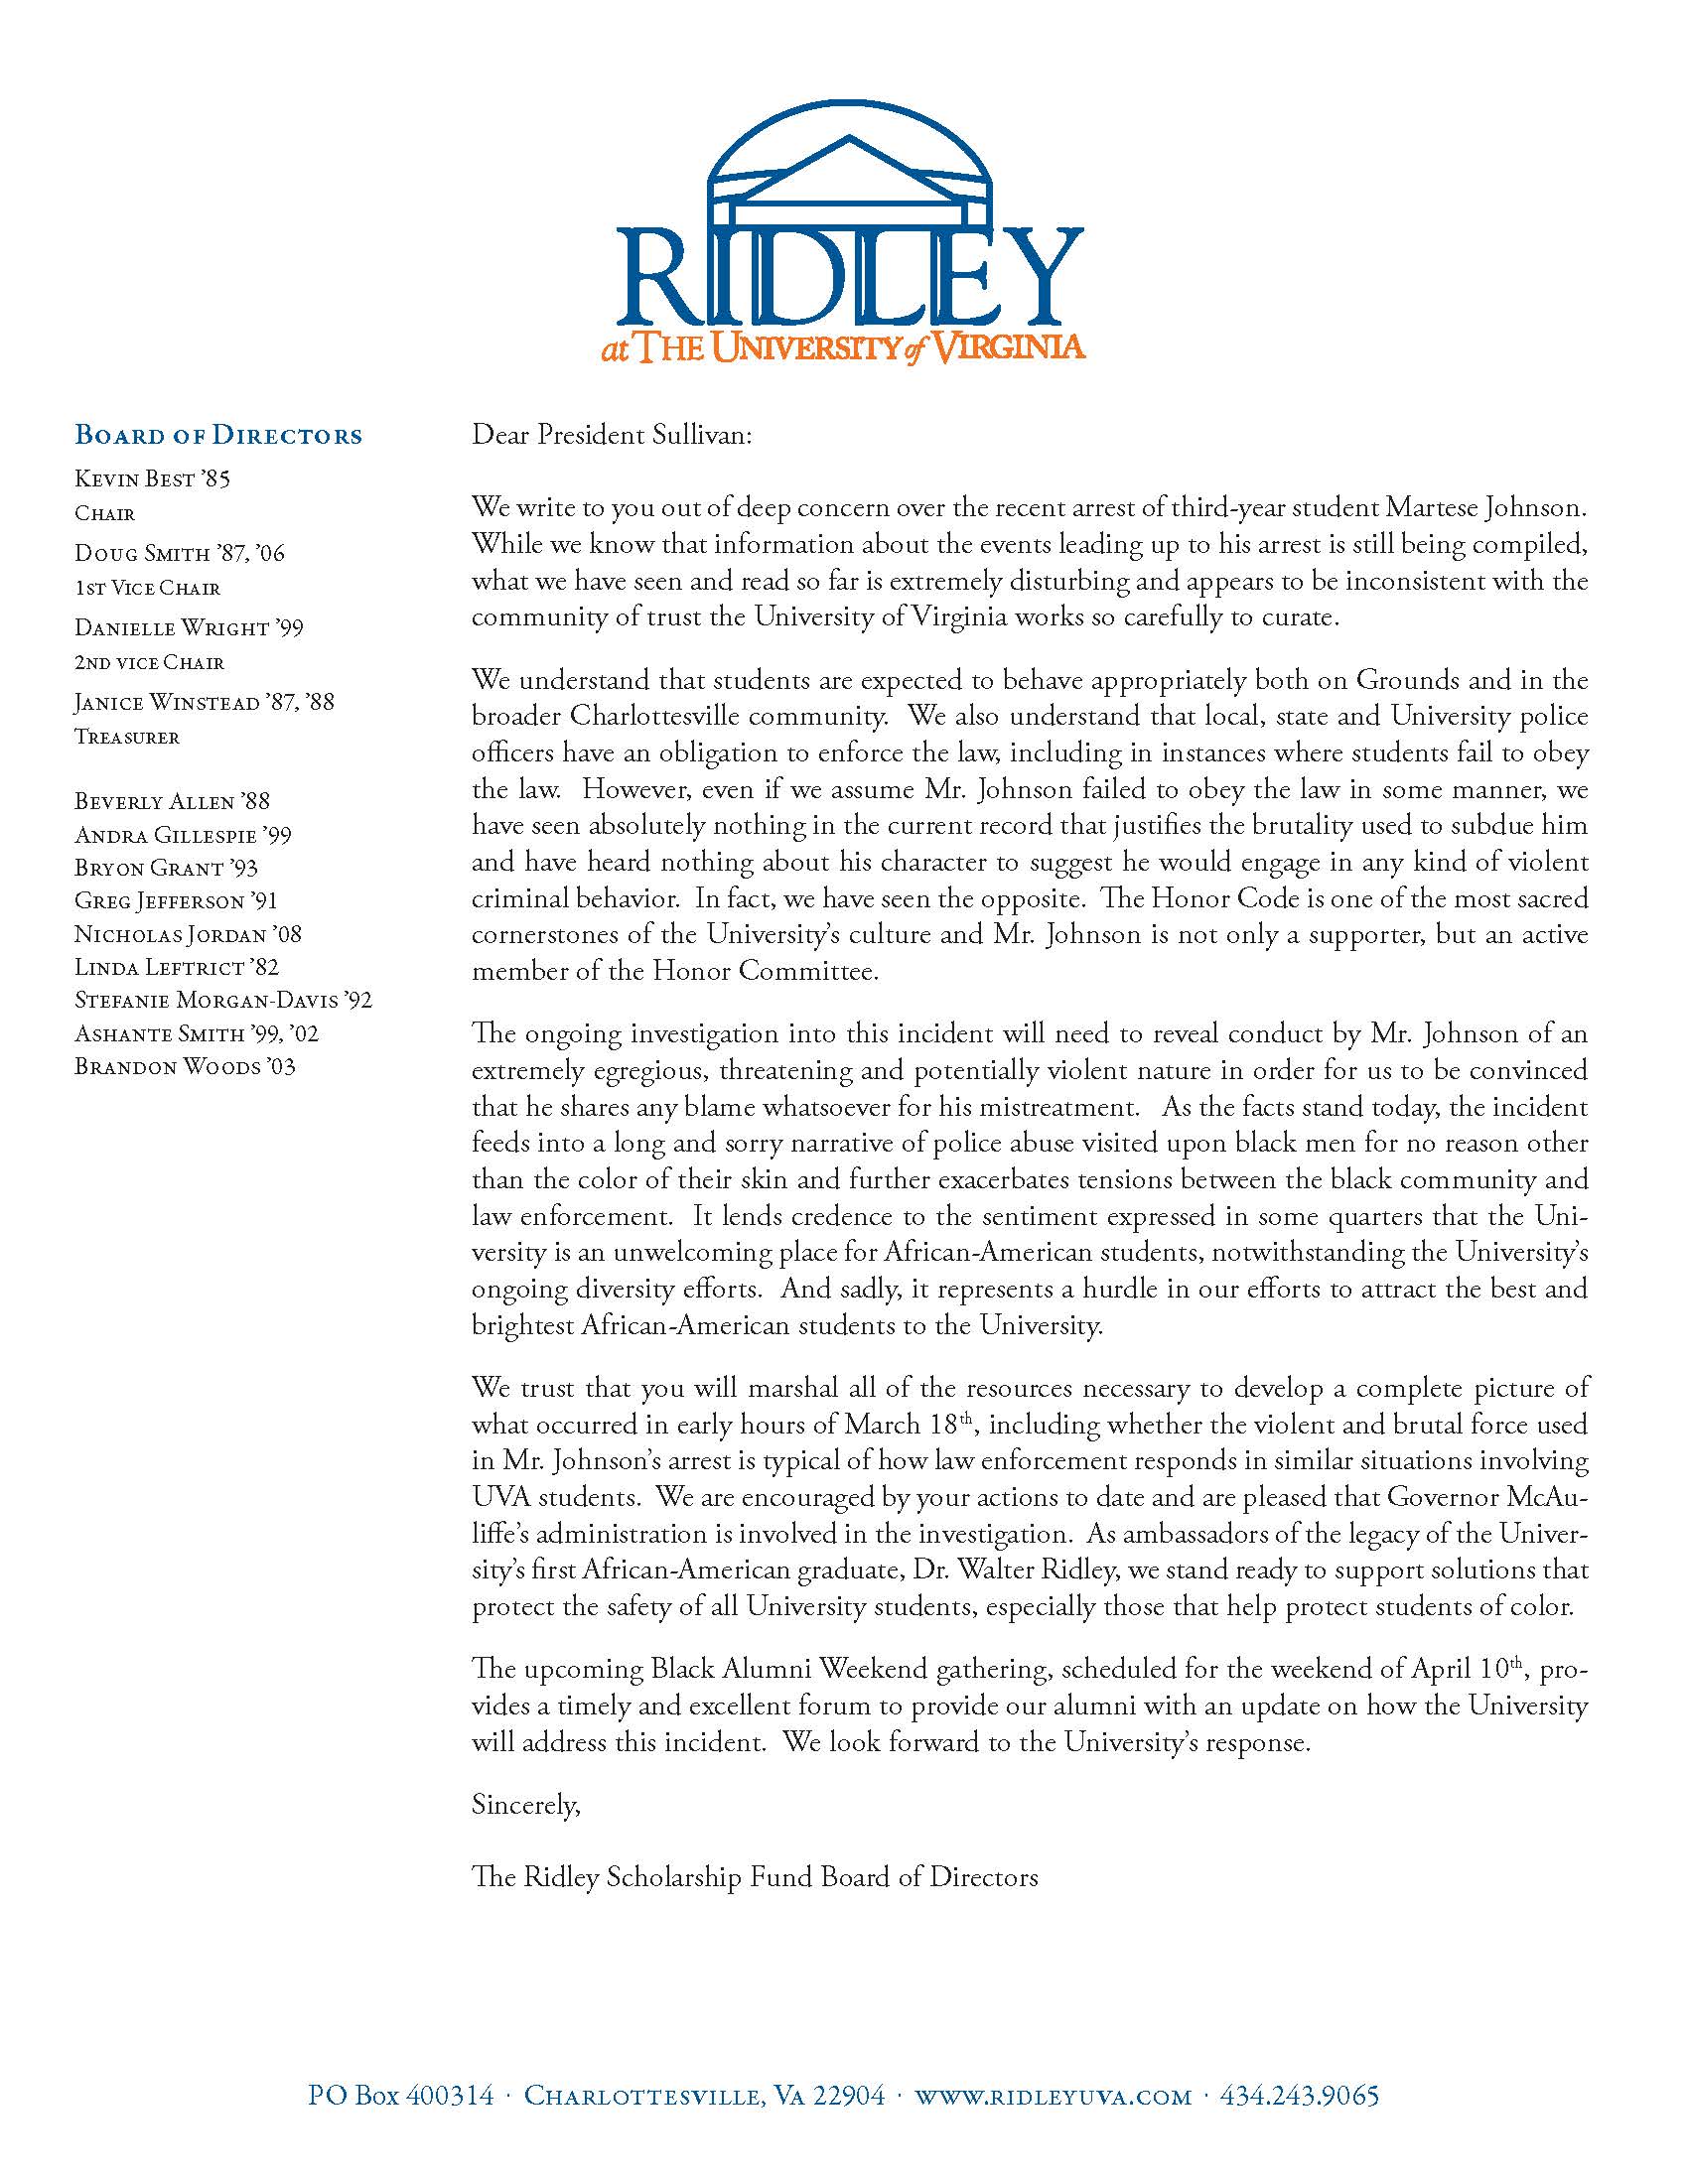 Letter sent from the Ridley Scholarship Fund Board of Directors to University President Sullivan regarding the arrest of third-year student Martese Johnson.